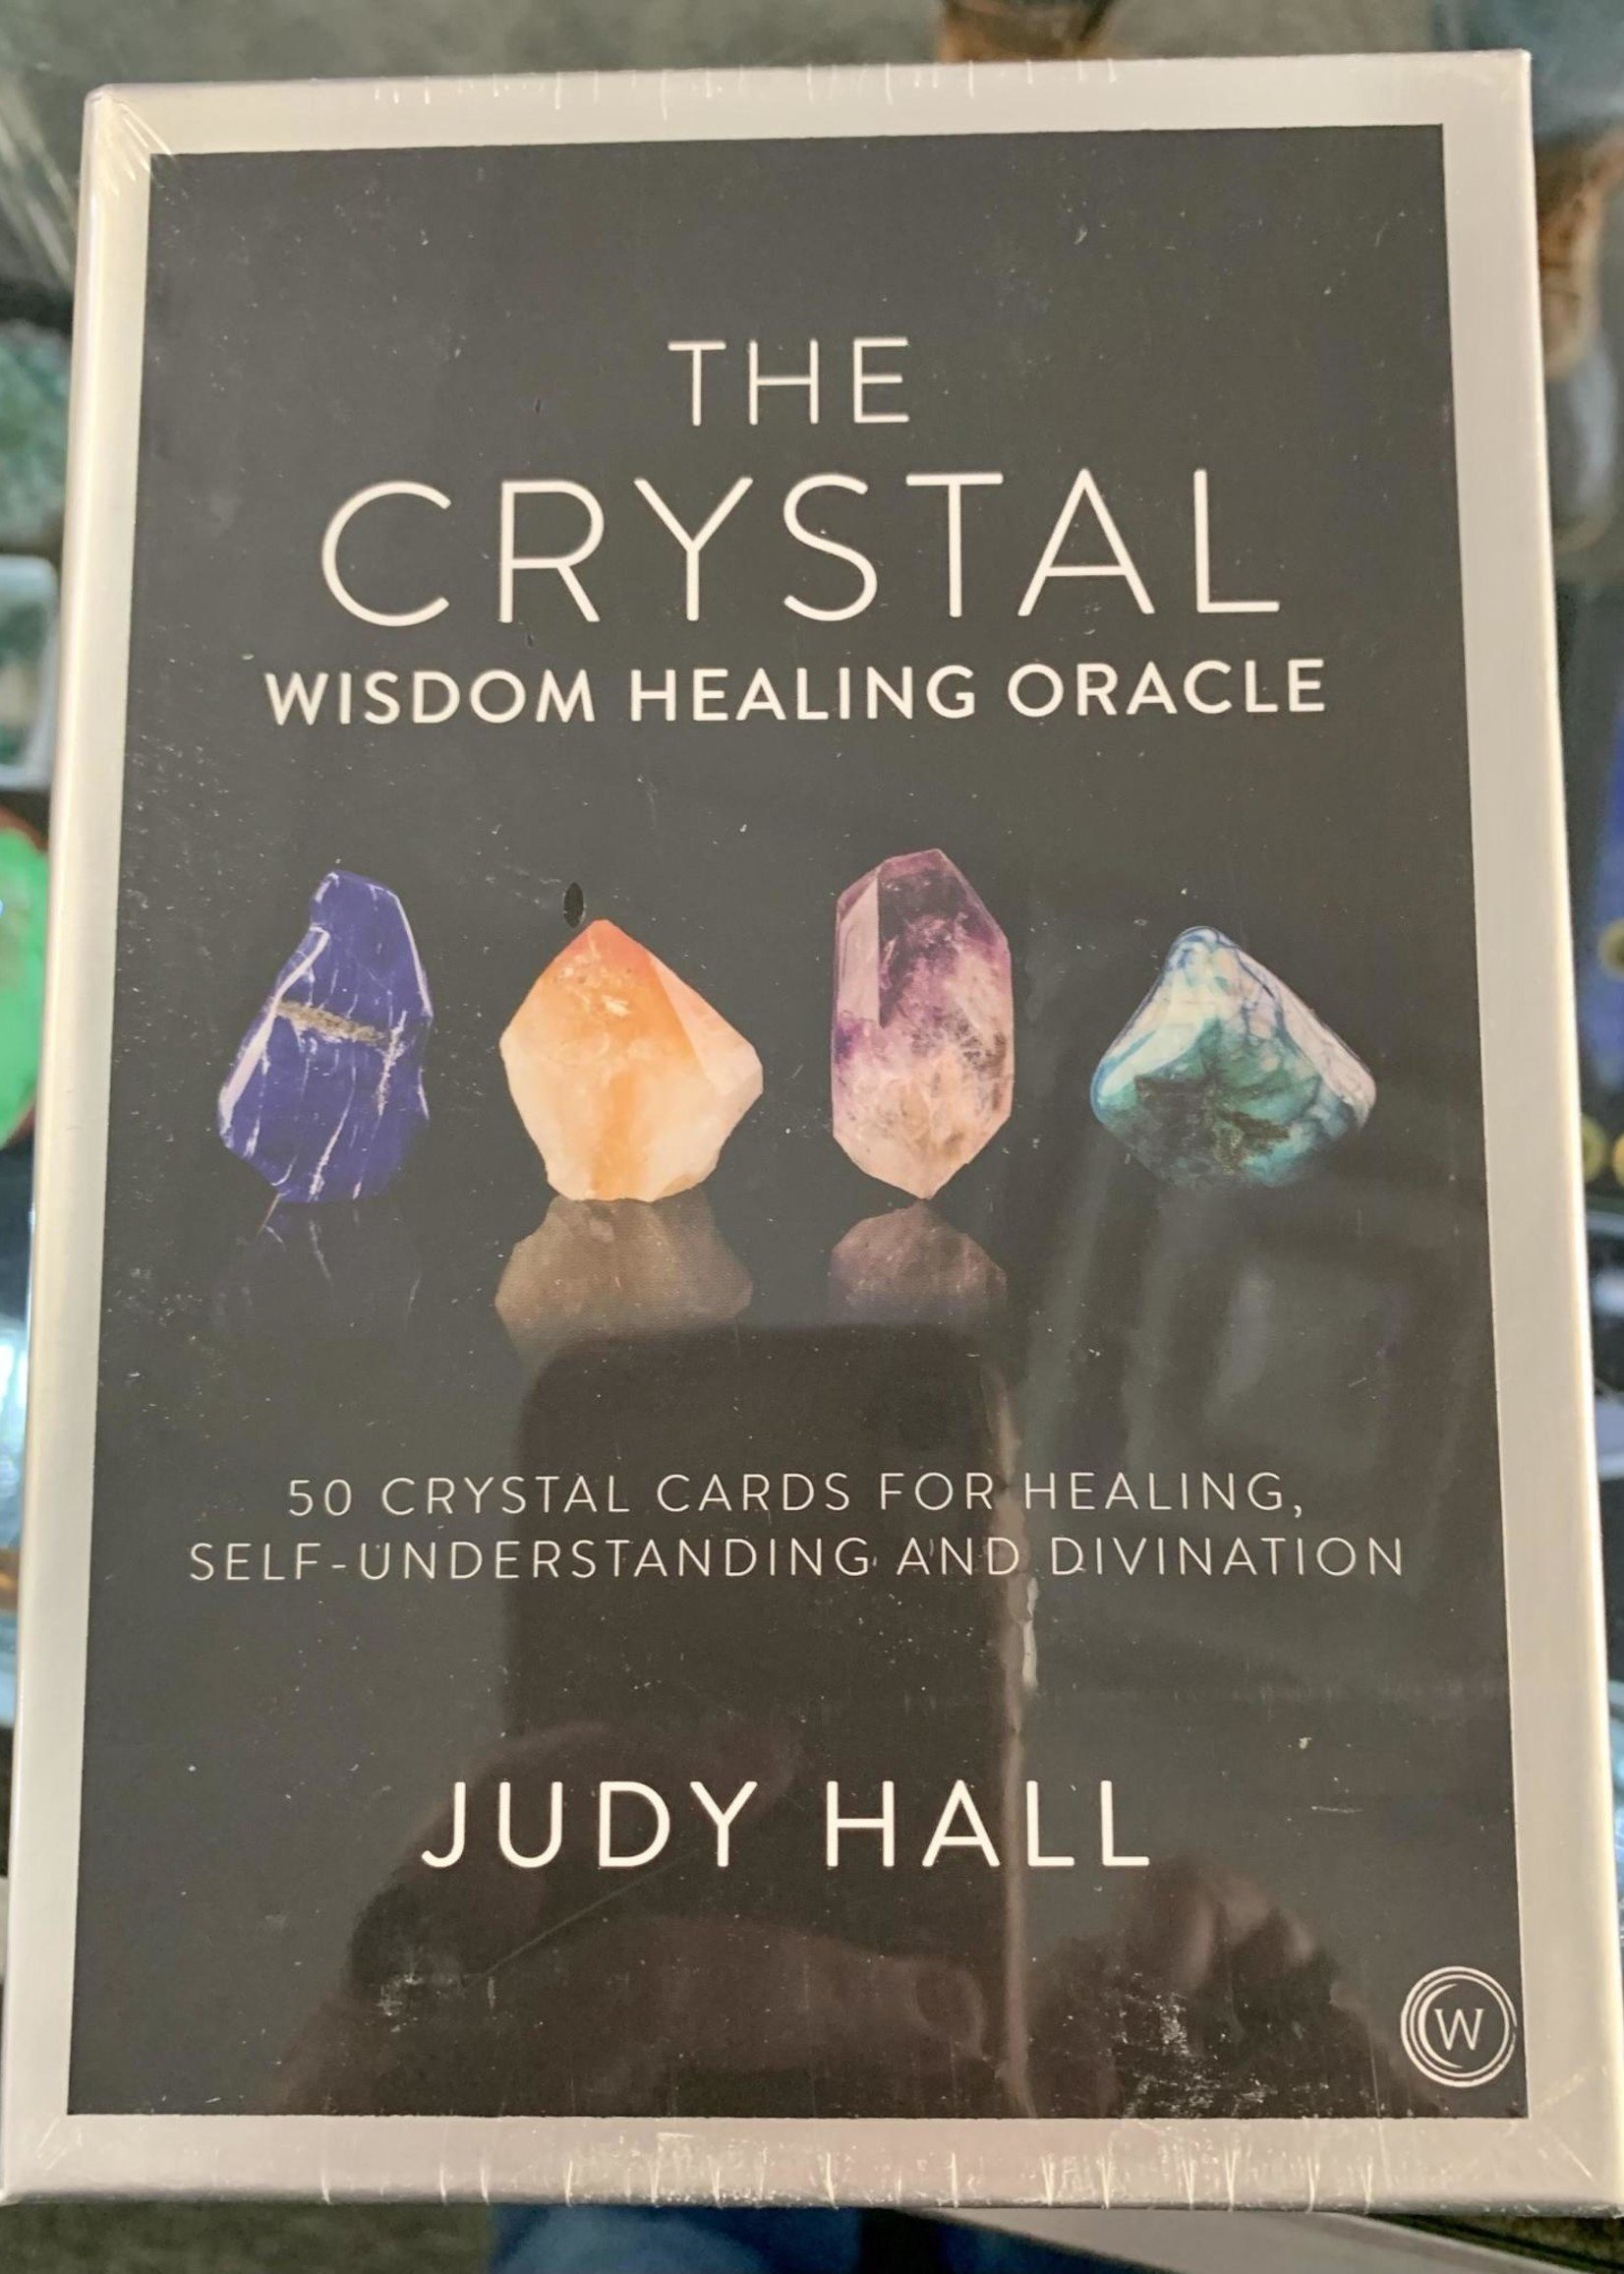 Crystal Wisdom Healing Oracle 50 ORACLE CARDS FOR HEALING, SELF UNDERSTANDING AND DIVINATION -By JUDY HALL